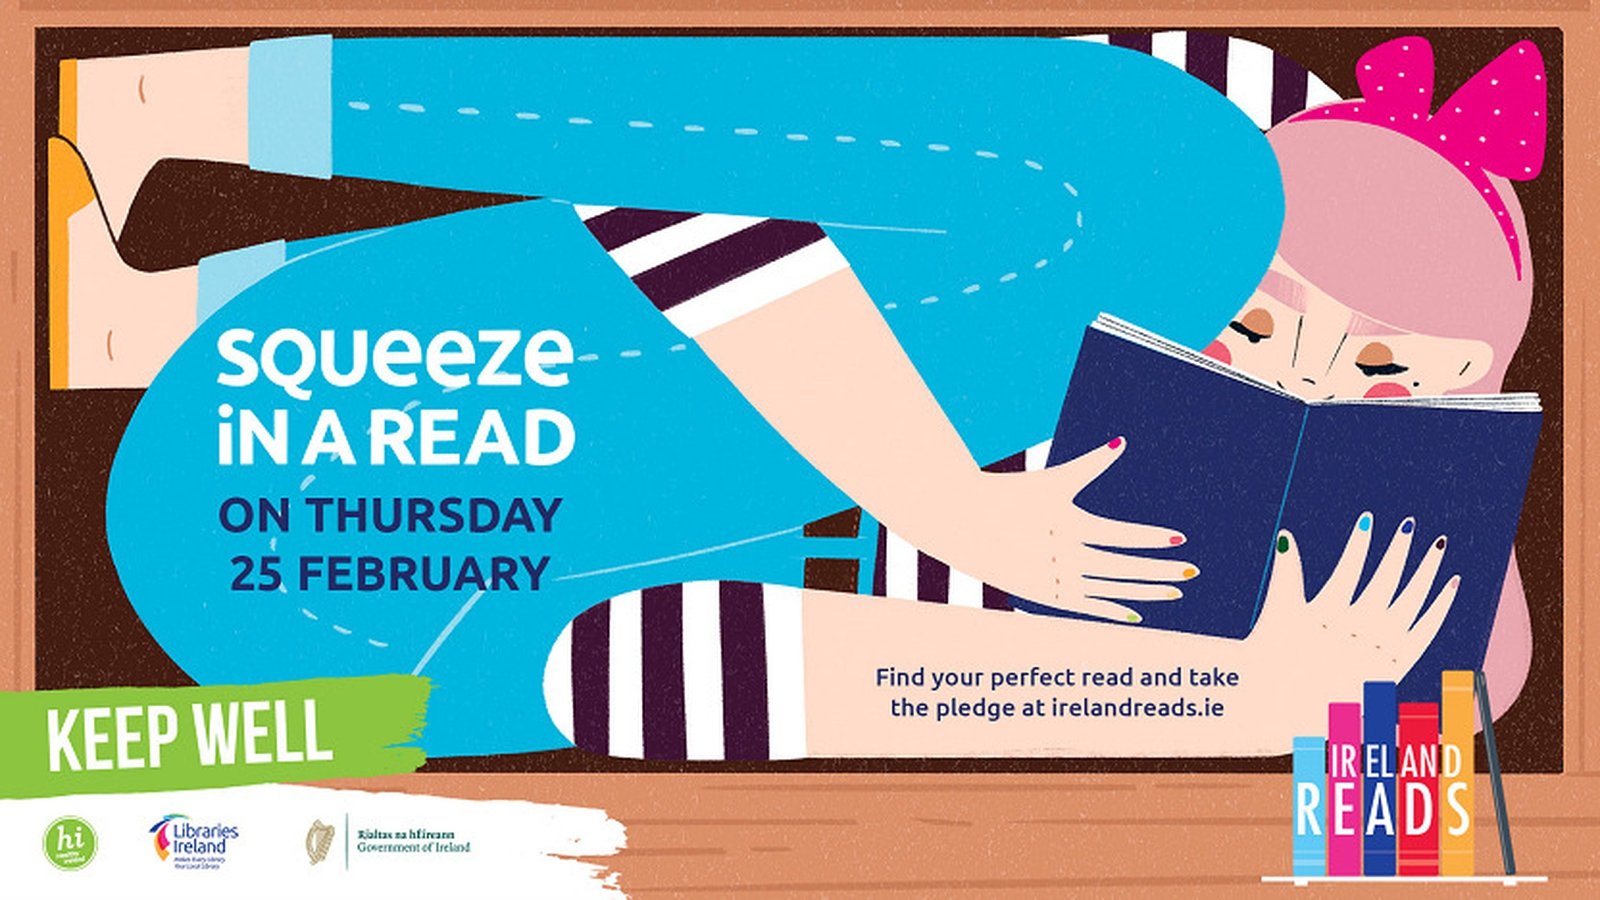 Ireland Reads a new national day to celebrate reading